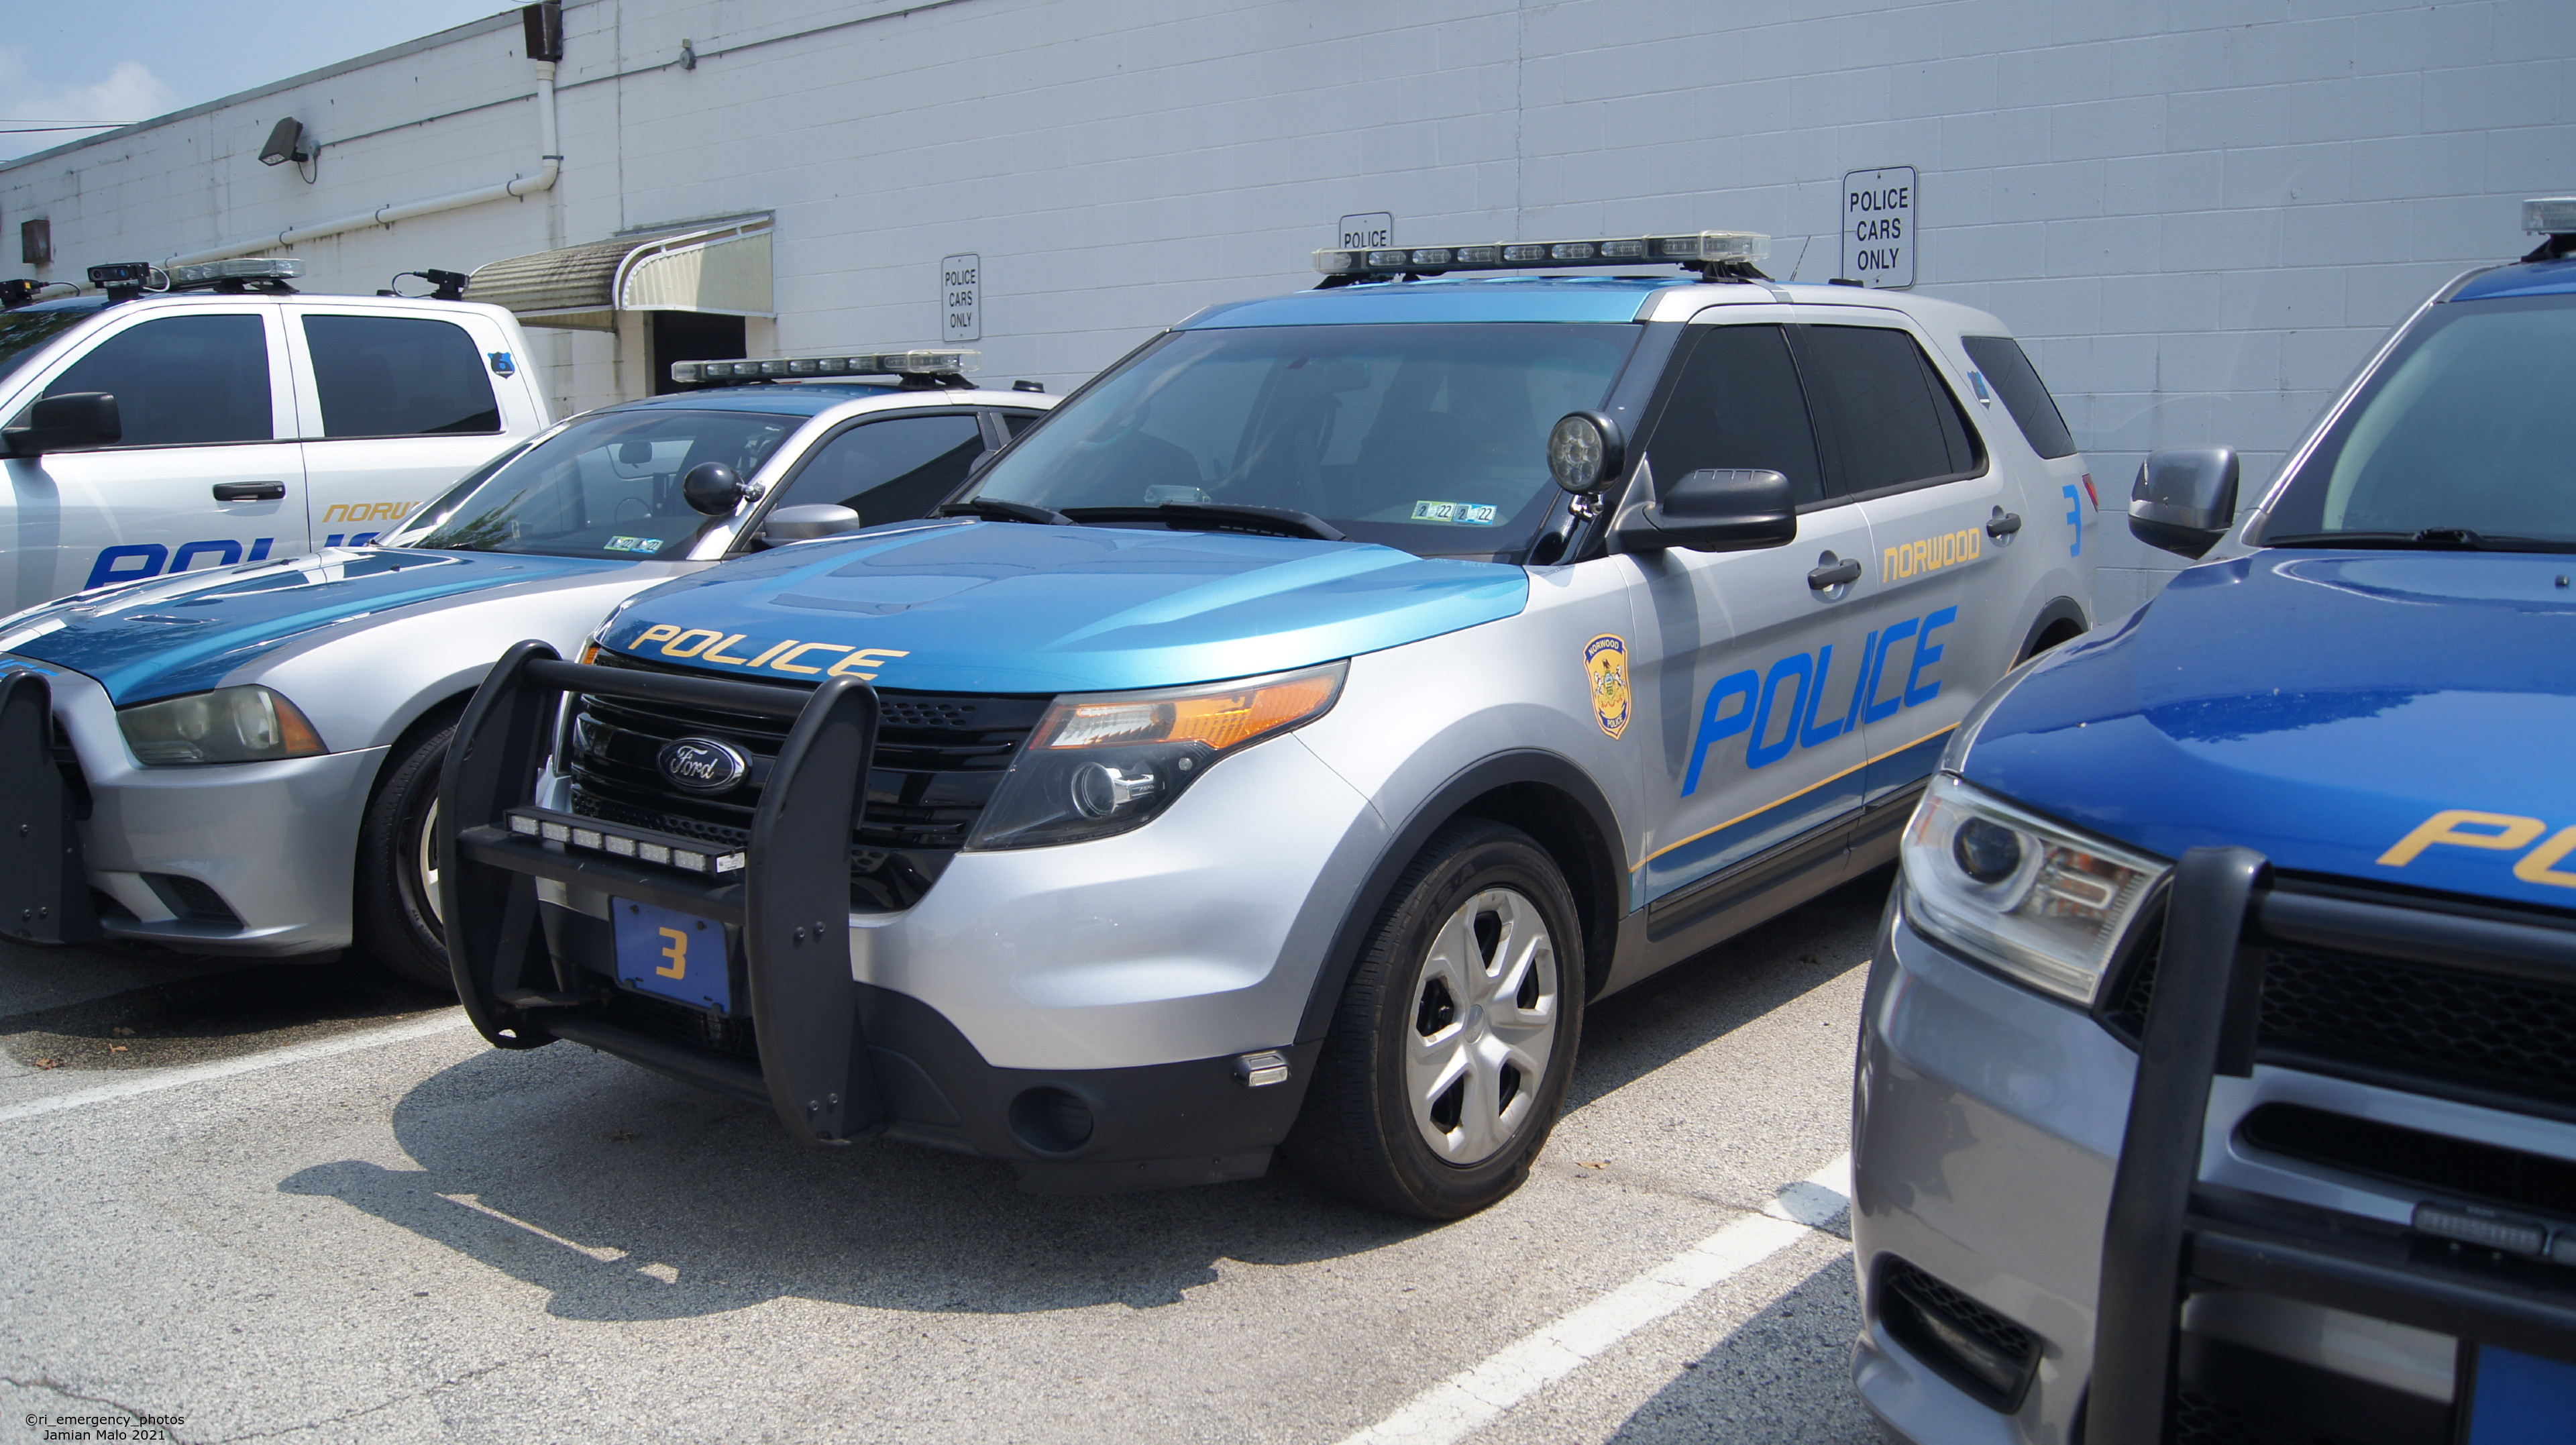 A photo  of Norwood Police
            Car 3, a 2013-2015 Ford Police Interceptor Utility             taken by Jamian Malo